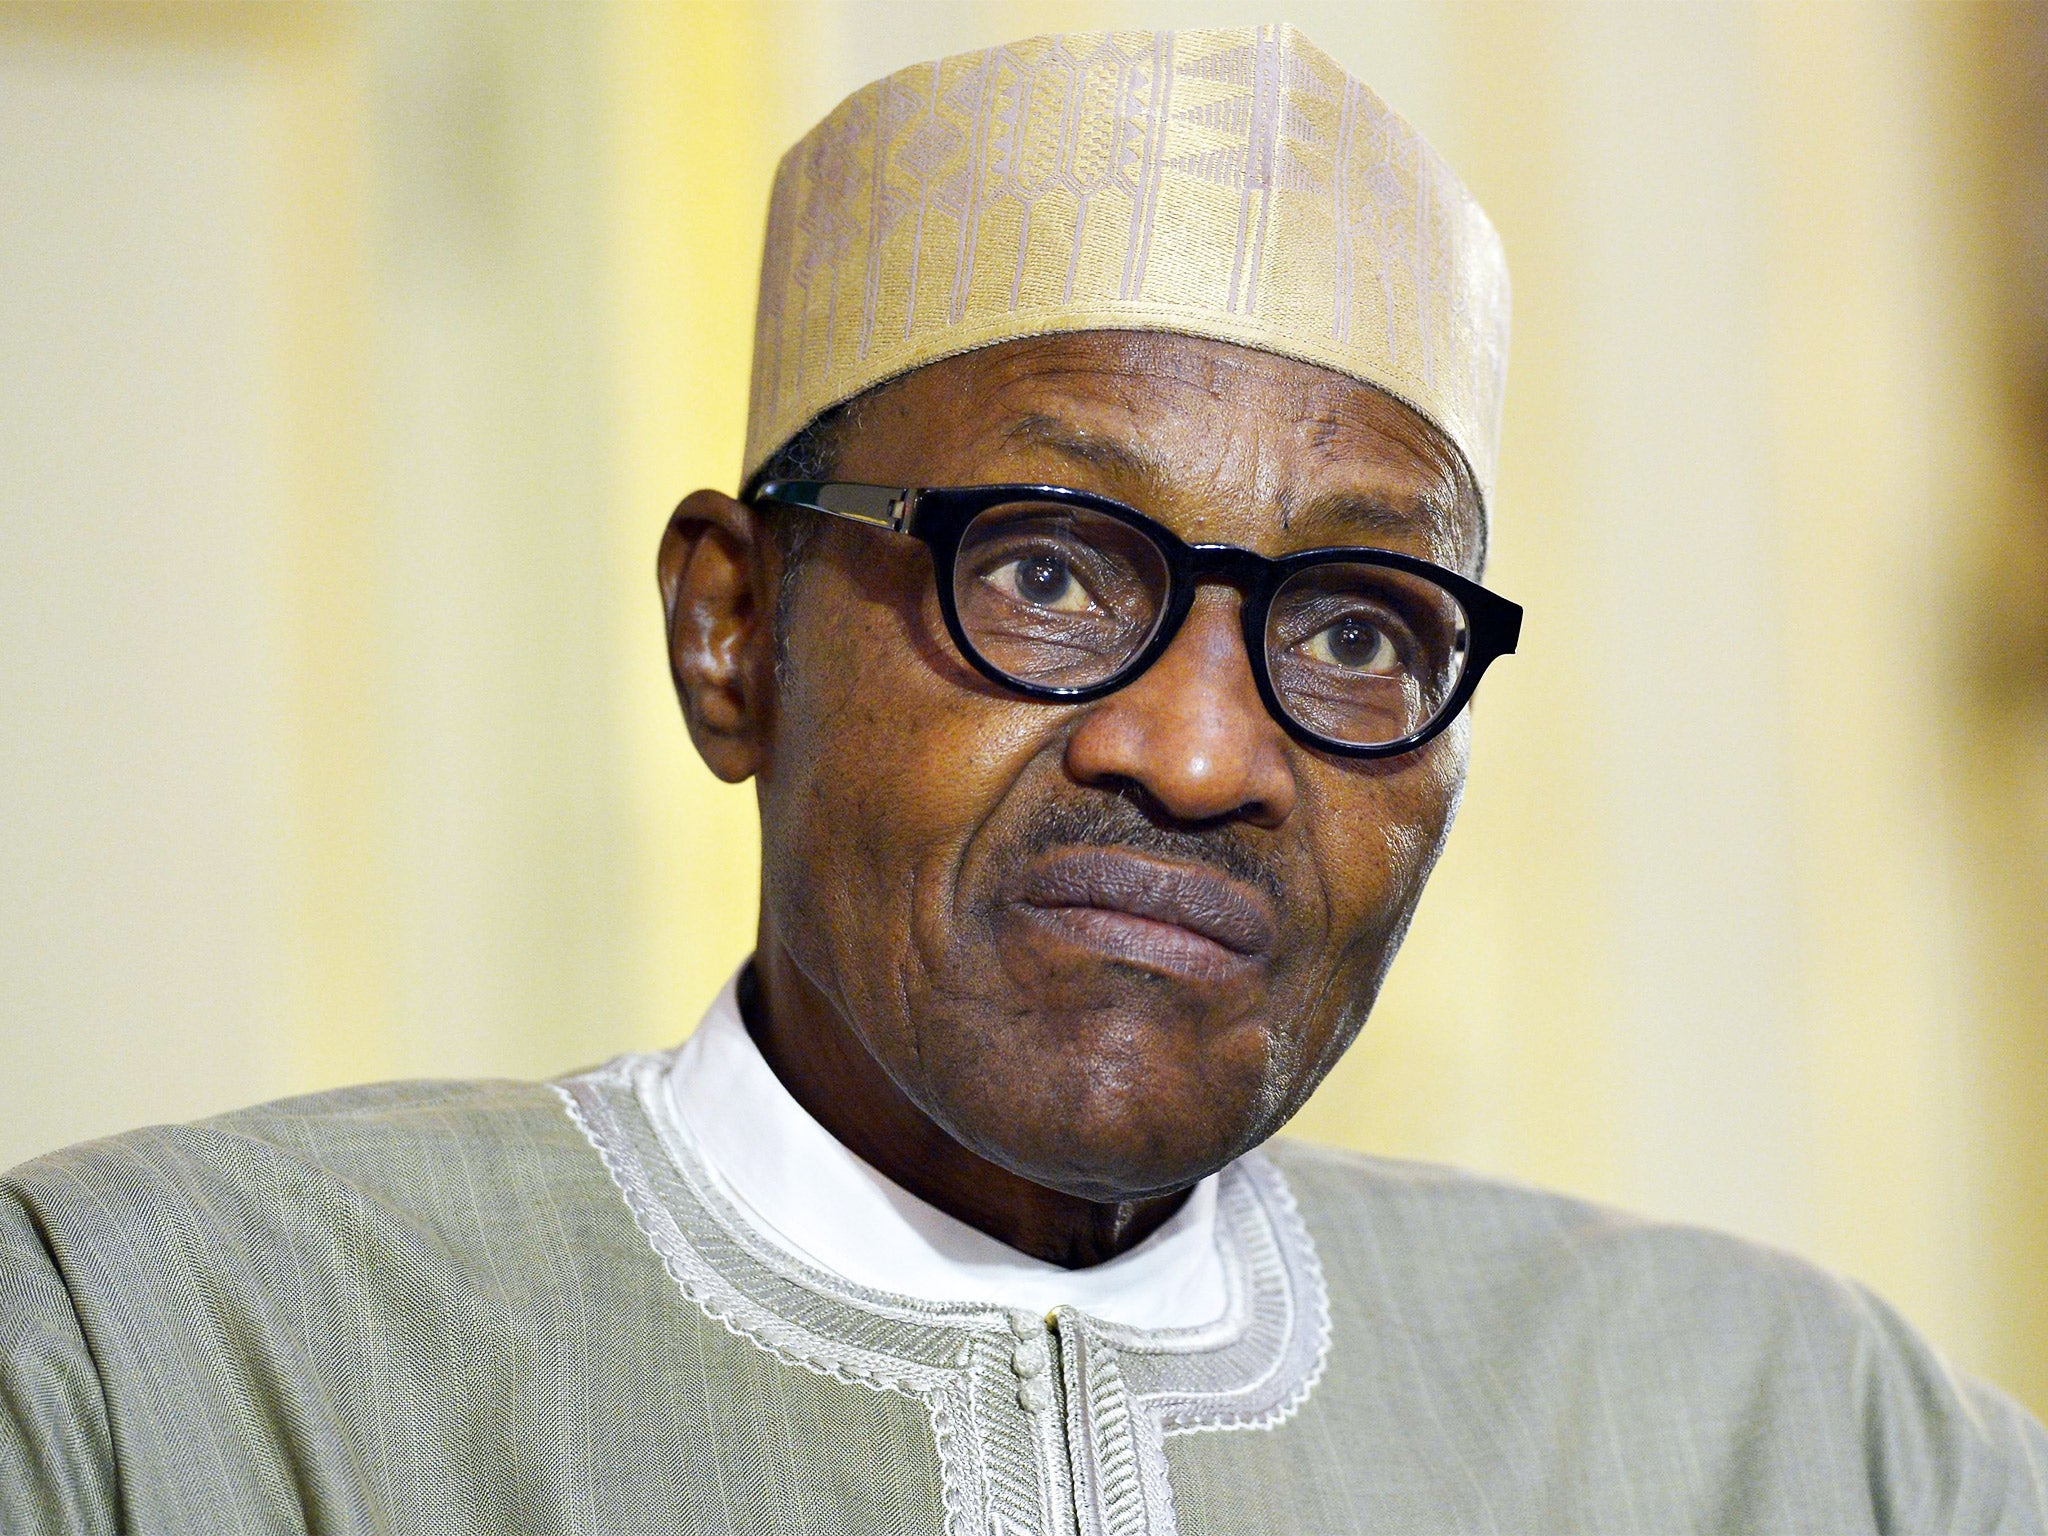 President Buhari has still not specified what positions the nominees will have